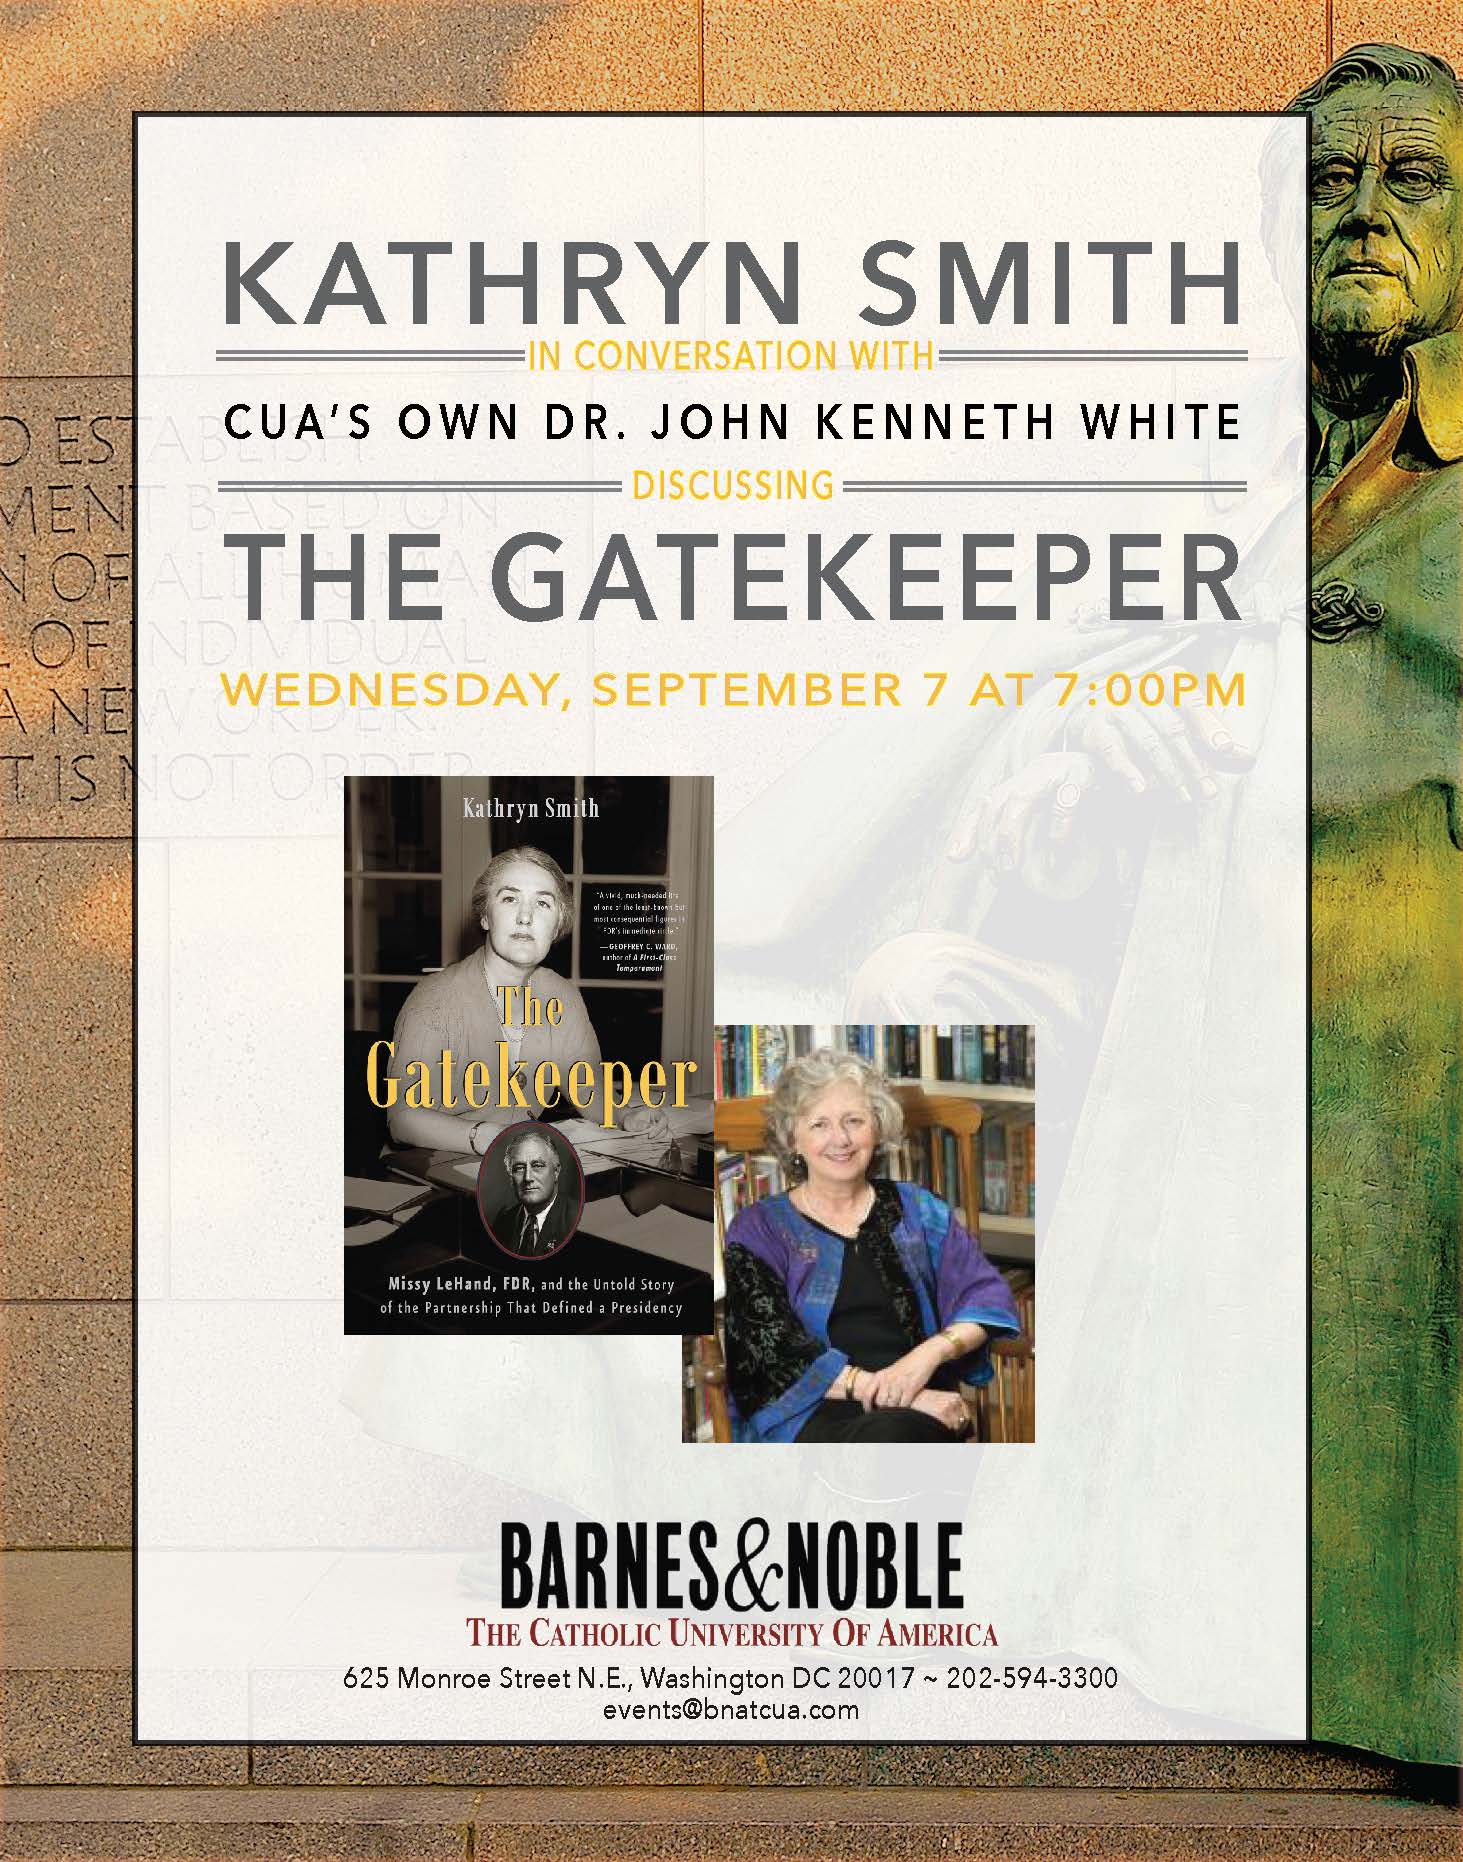 Barnes & Noble: Kathryn Smith Discusses The Gatekeeper